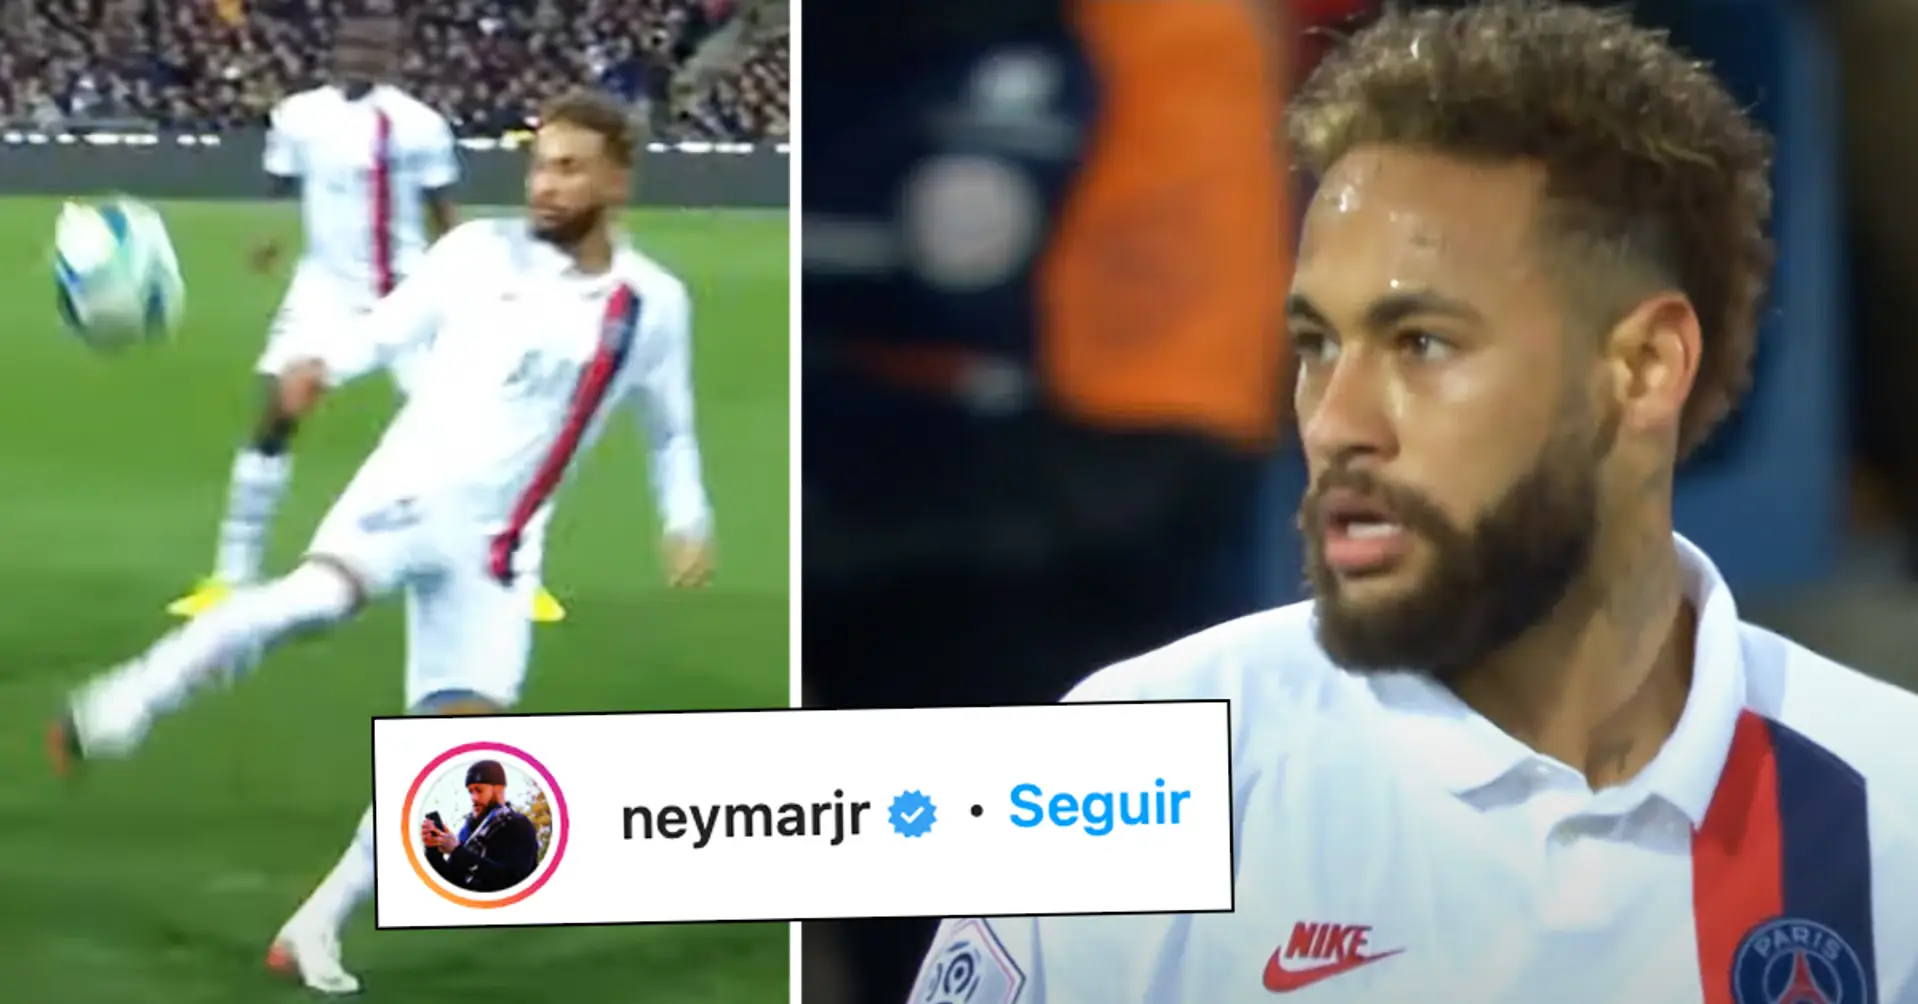 Neymar explodes on Instagram after PSG game: ‘They are taking it personally. Thanks for leaving me out of final.’